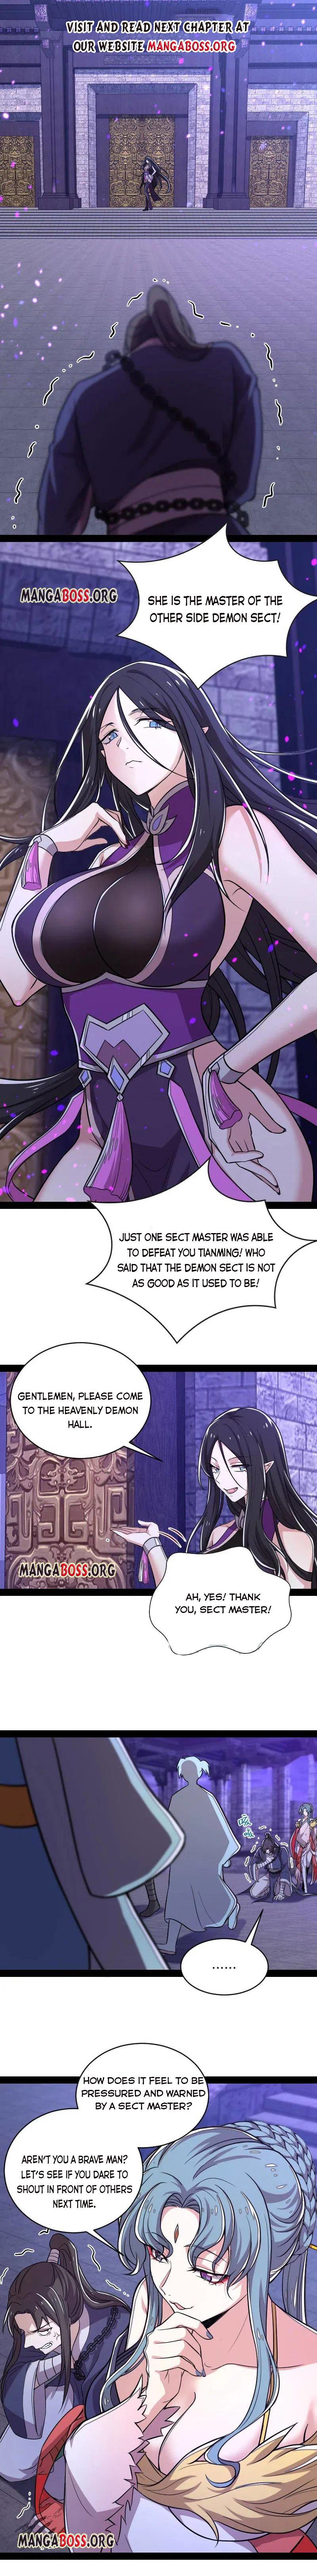 Life of a War Emperor After Retirement Chapter 55 page 1